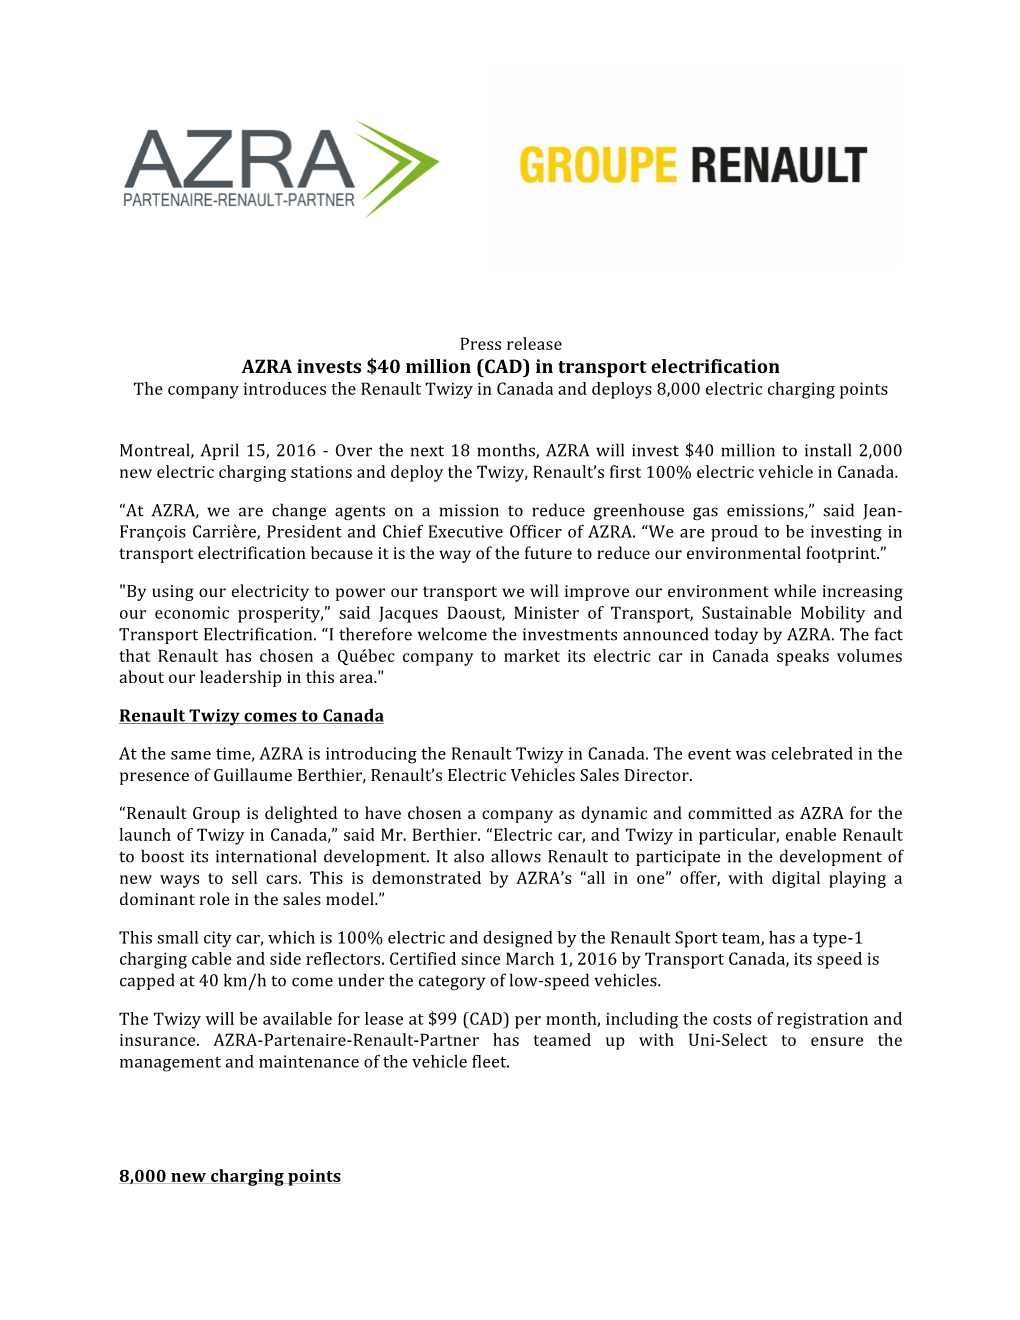 AZRA Invests $40 Million (CAD) in Transport Electrification the Company Introduces the Renault Twizy in Canada and Deploys 8,000 Electric Charging Points